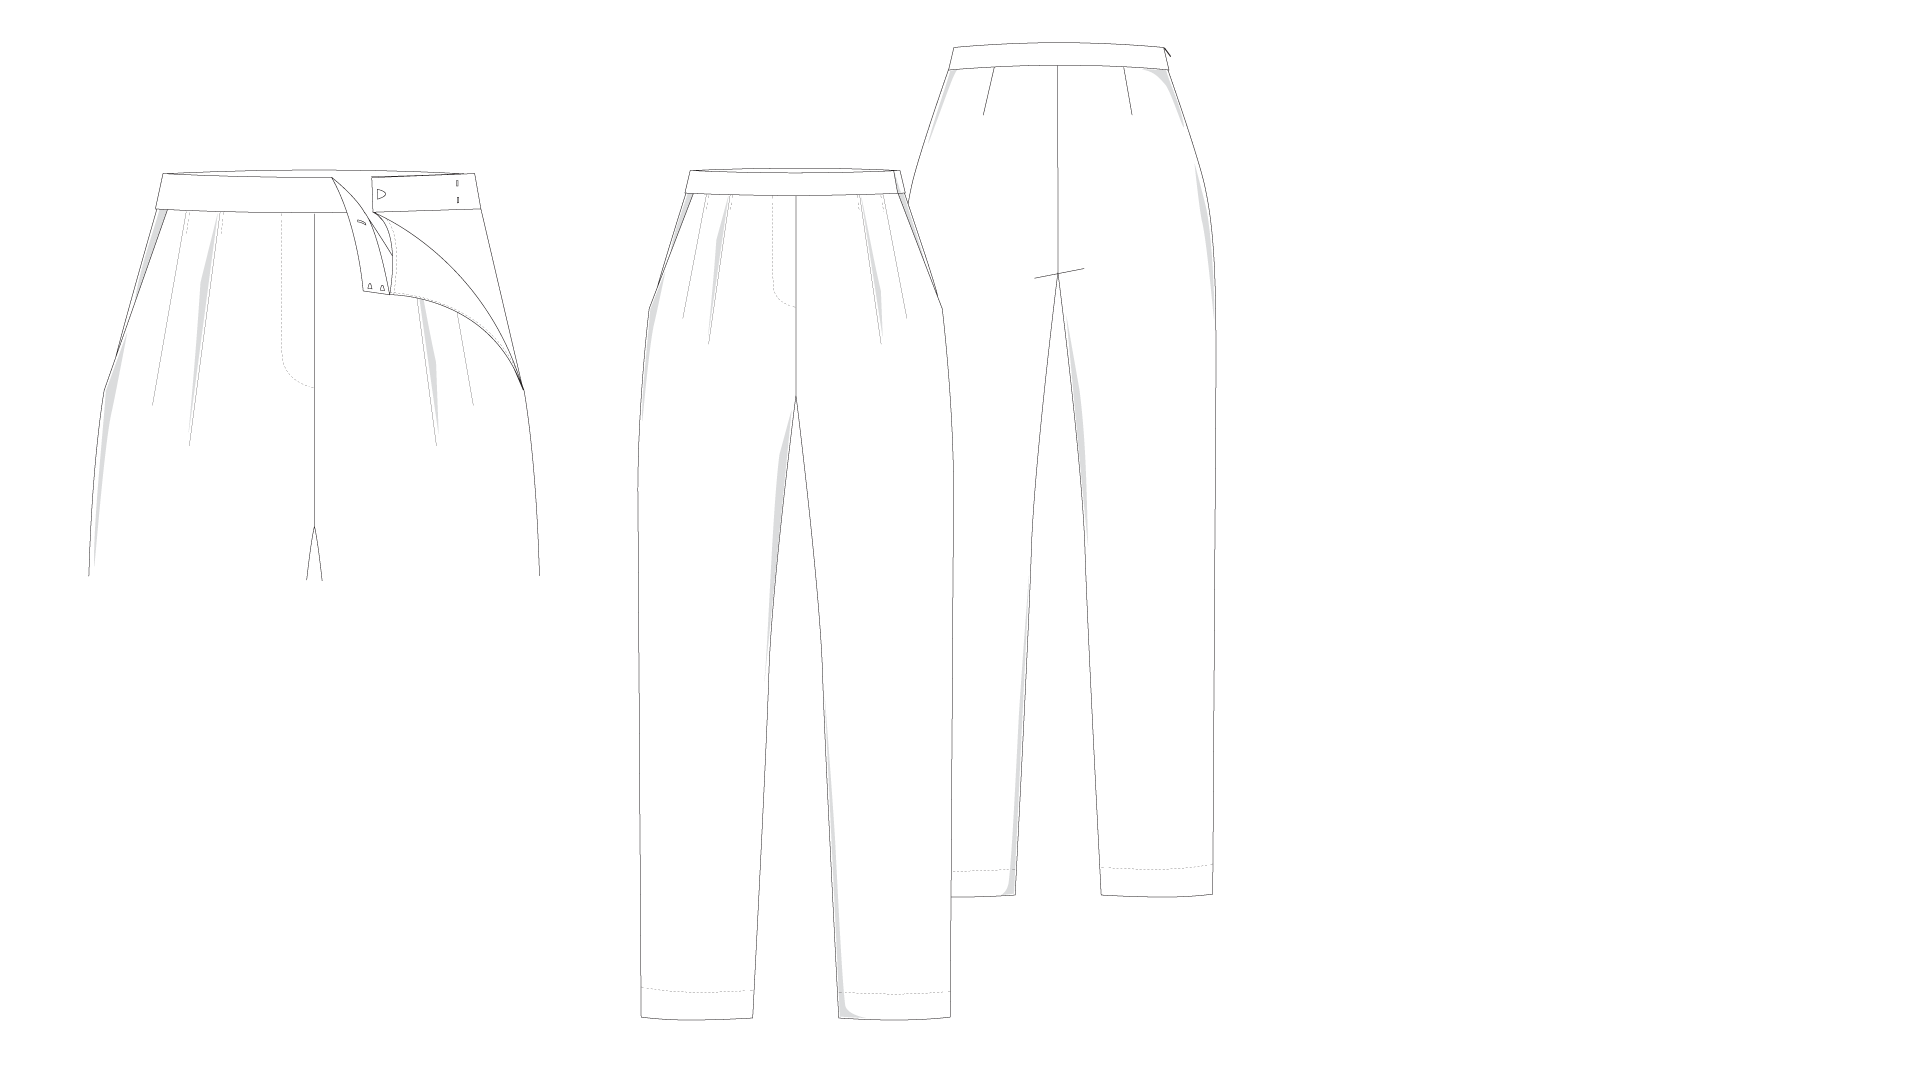 Technical drawing pleated trouser